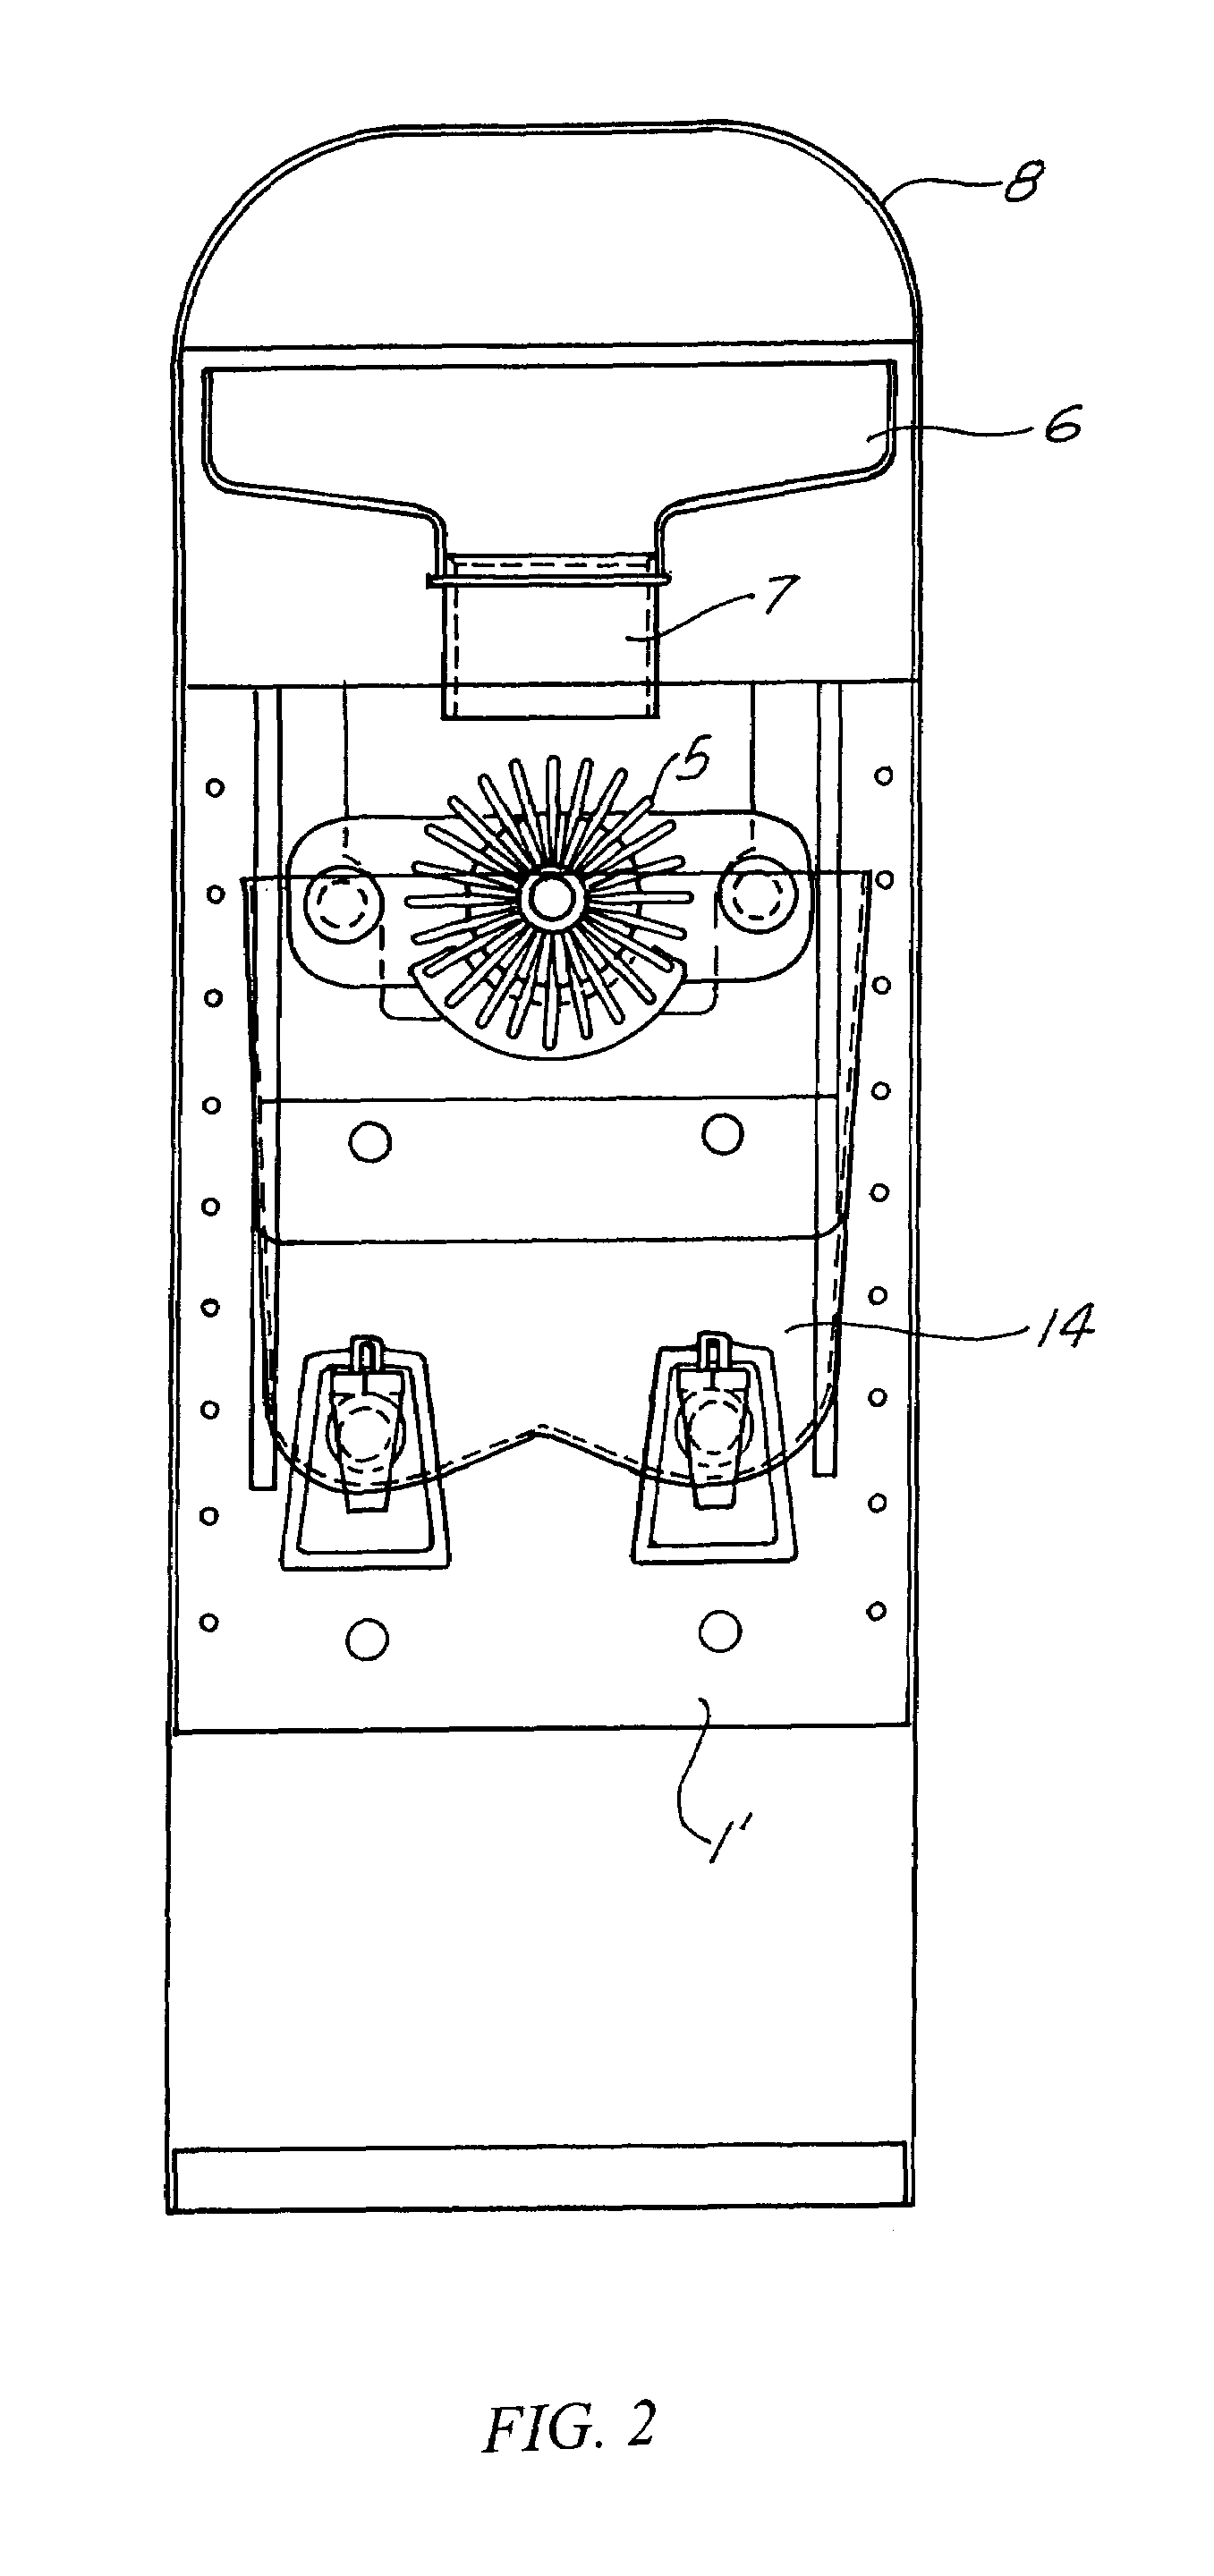 Filtering device for a citrus juice extraction machine